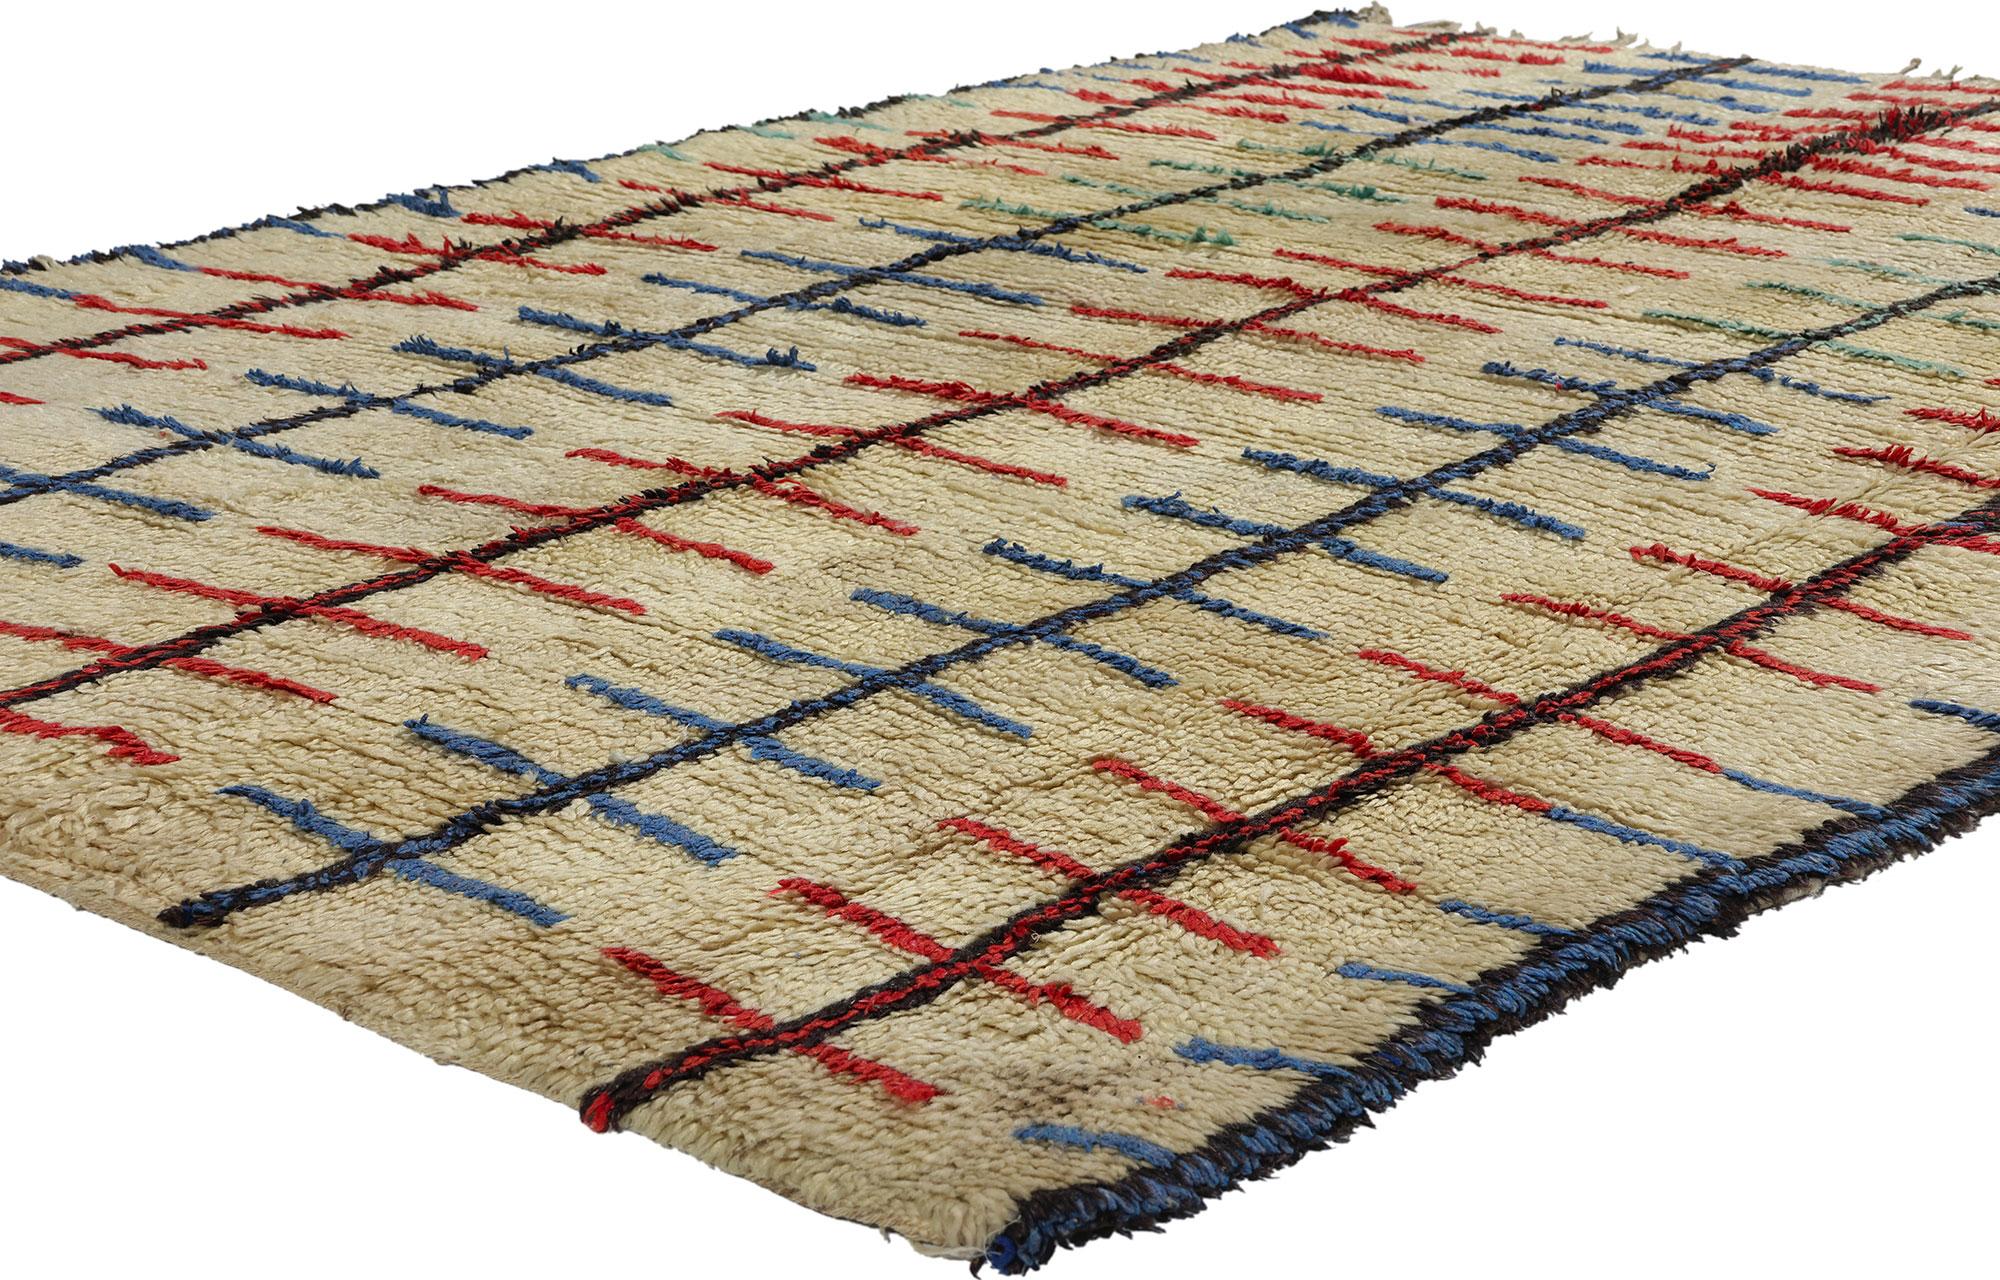 21811 Vintage Moroccan Azilal Rug, 05'03 x 06'10. Immerse yourself in the timeless allure of Midcentury Modern and bohemian style with this hand knotted wool vintage Moroccan Azilal rug. Effortlessly blending linear artistry with well-balanced